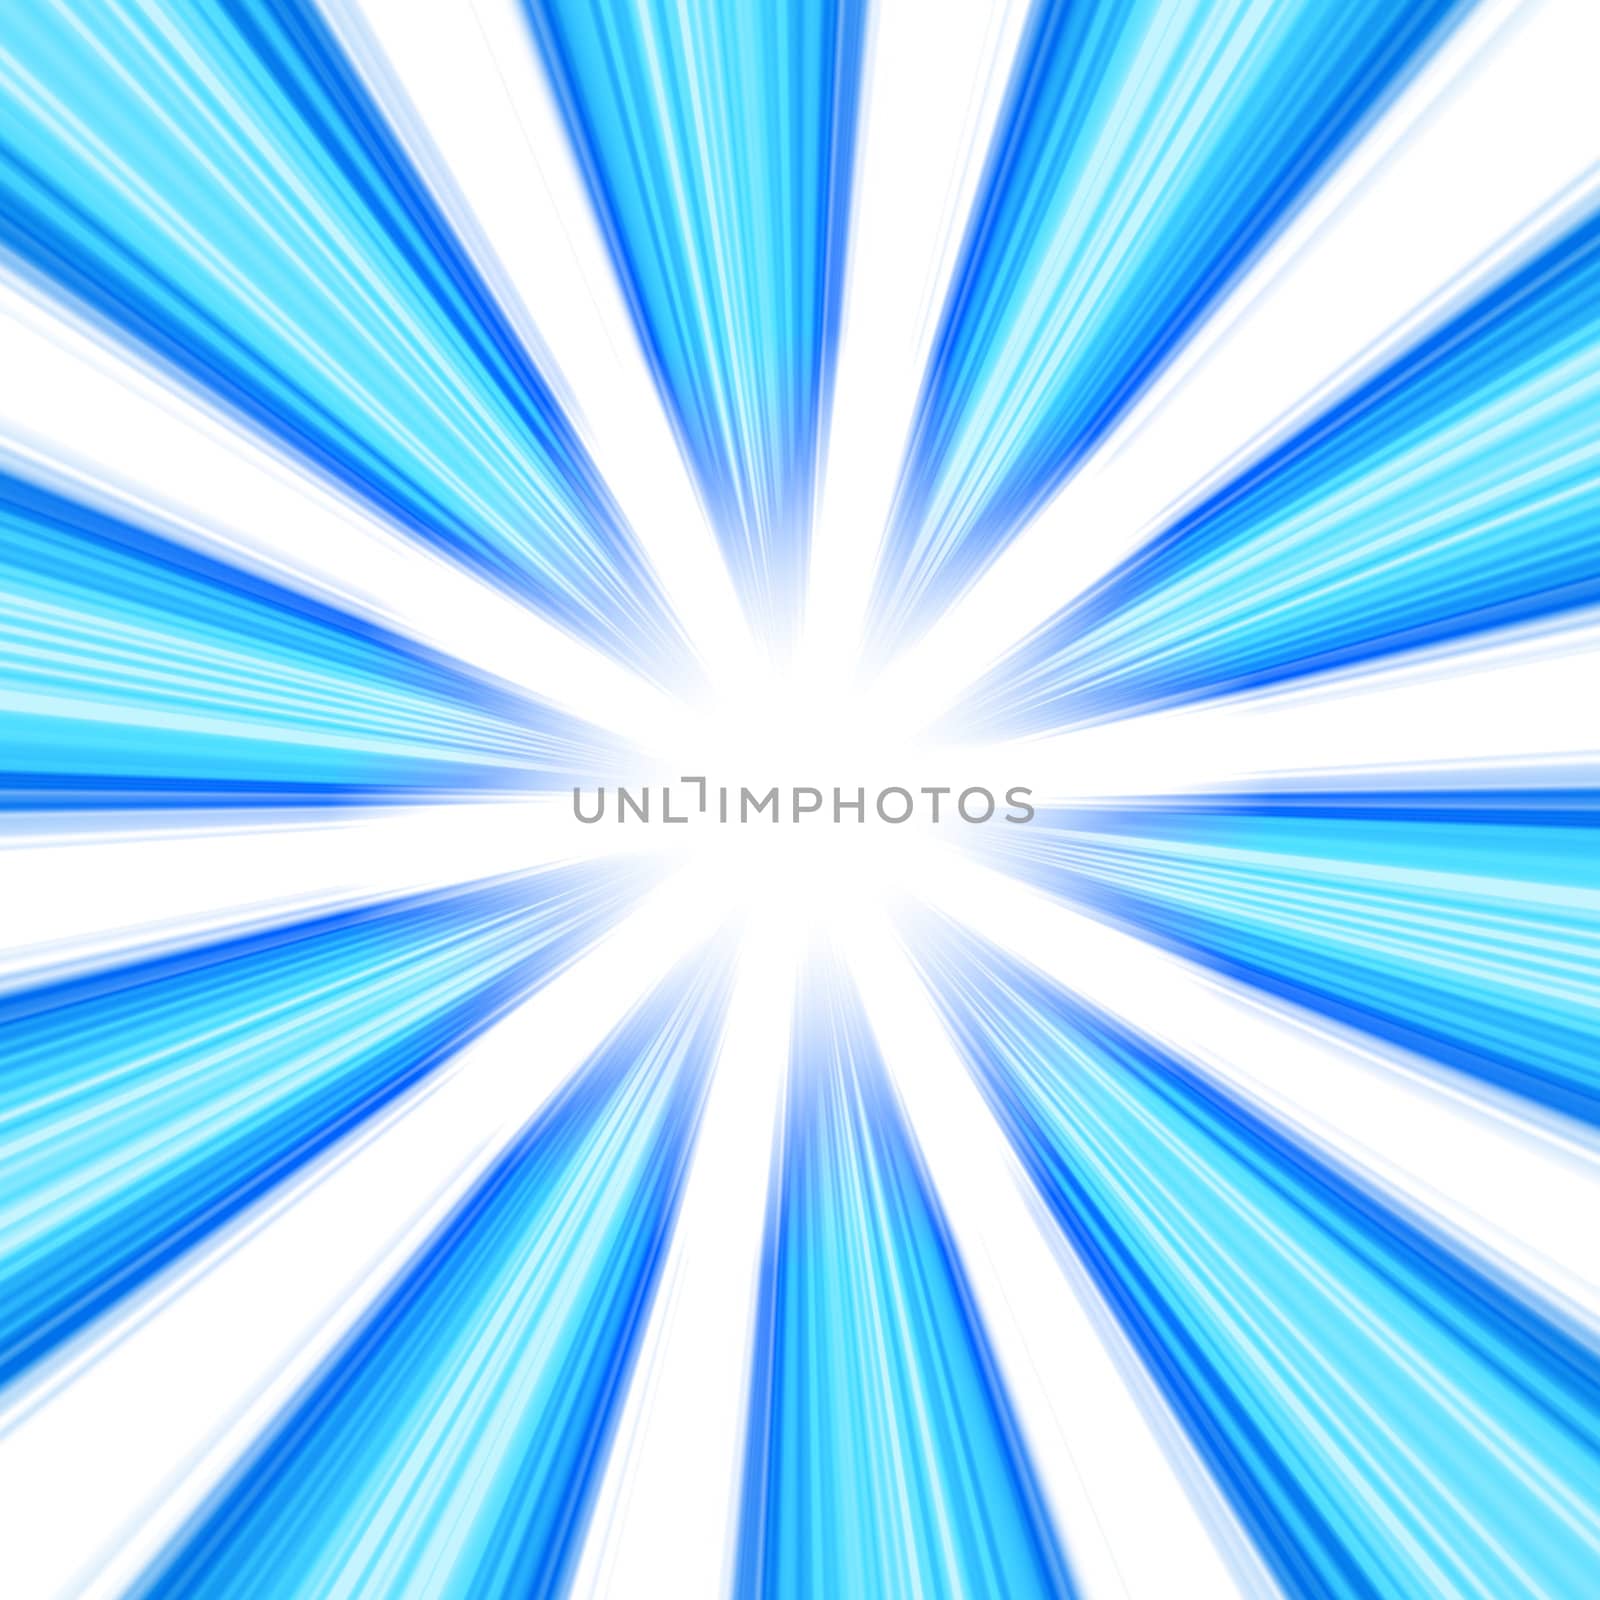 An abstract glowing burst layout with copyspace in the center.